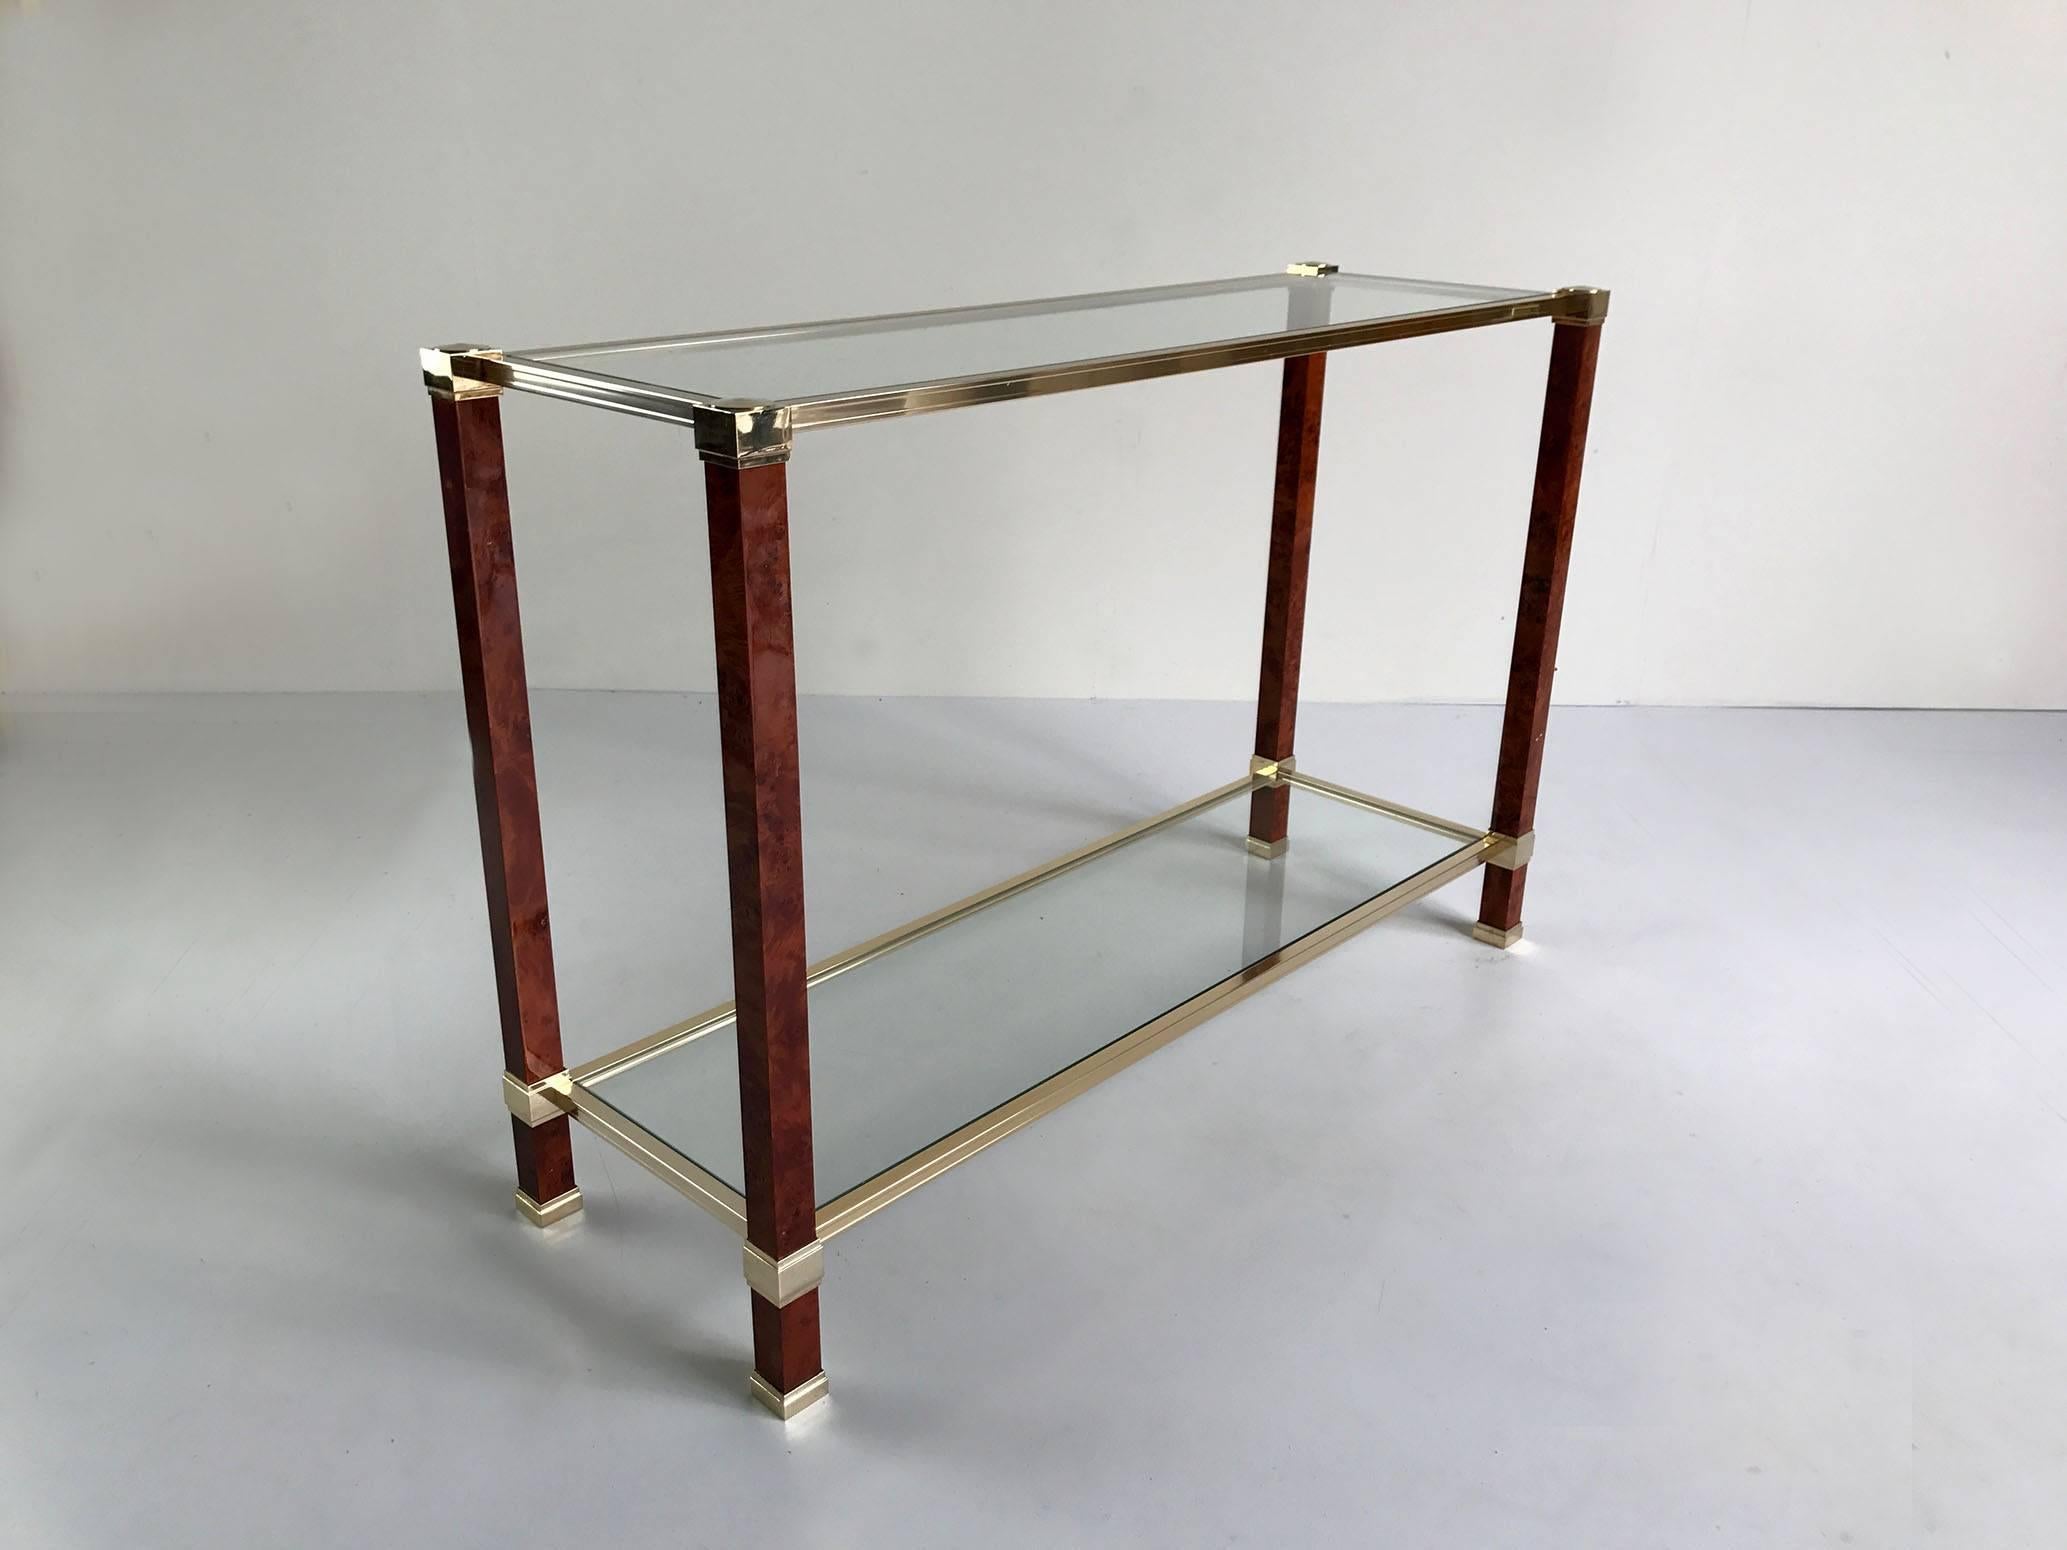 Double-deck console by Pierre Vandel, Paris 1980.
Spotted maple base, gilded metal, glass.
Exceptional state of origin.
signed.
   